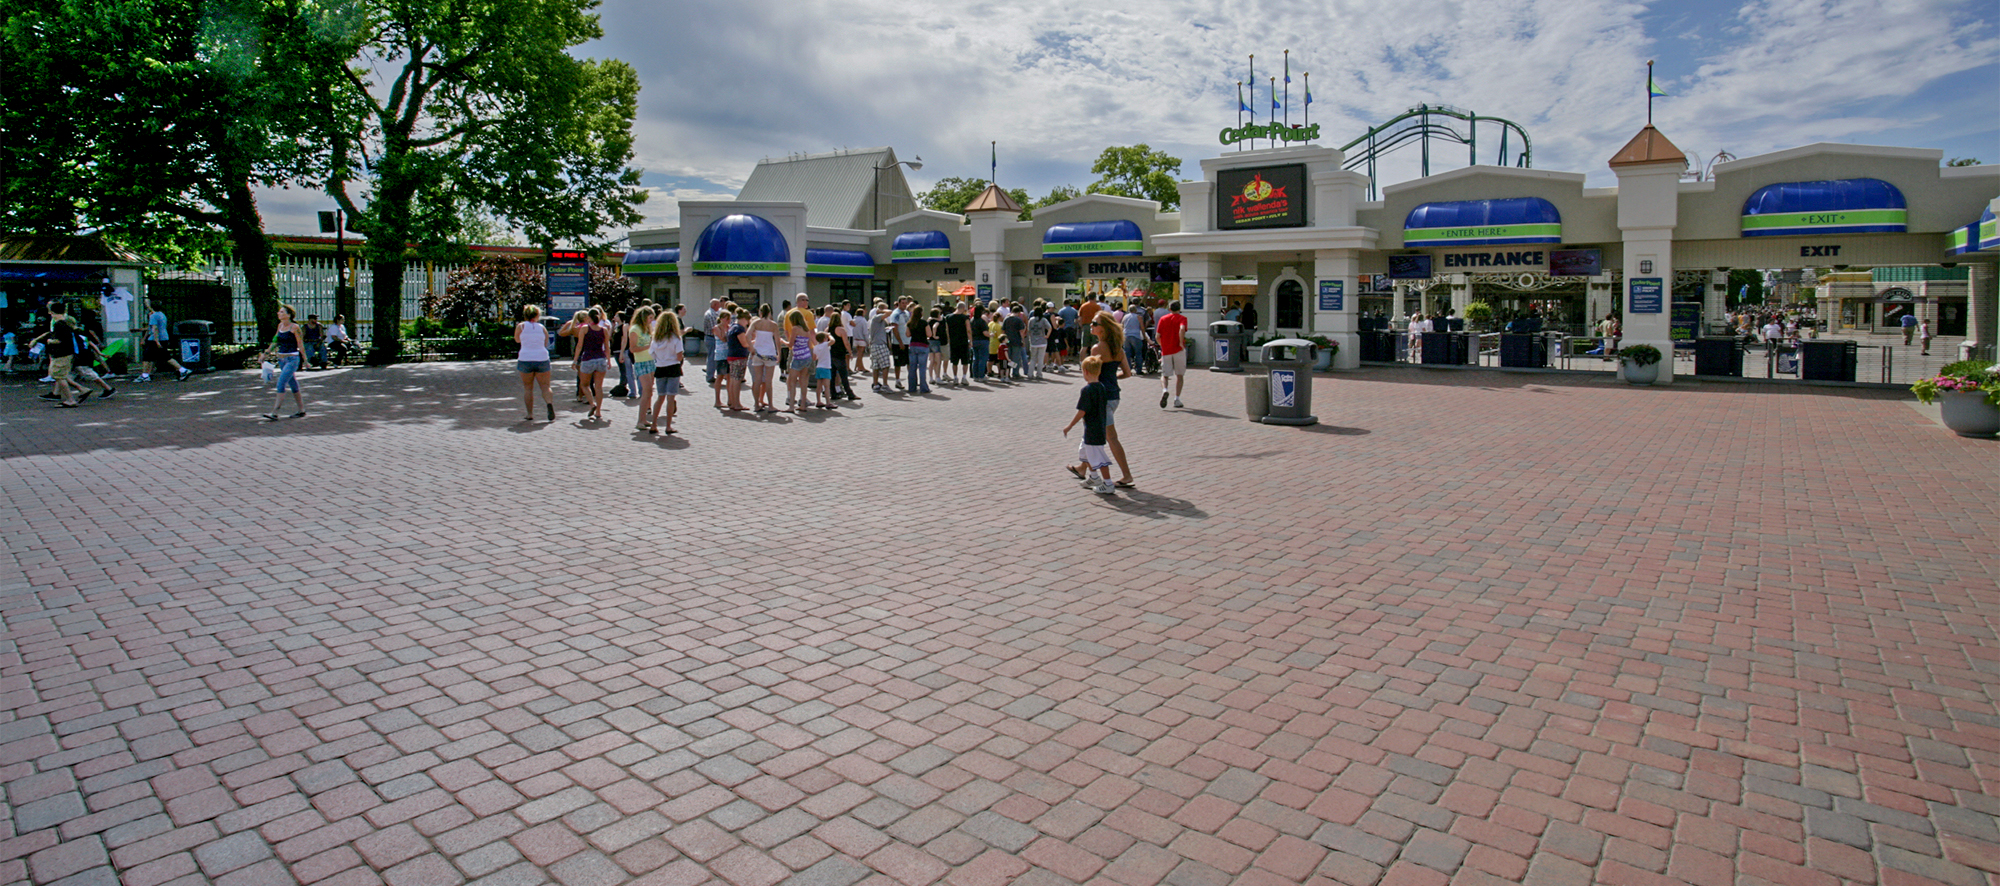 An expansive bed of Camelot pavers in a reddish-blue hue provides a comfortable surfaces for guests awaiting entry to Cedar Point.